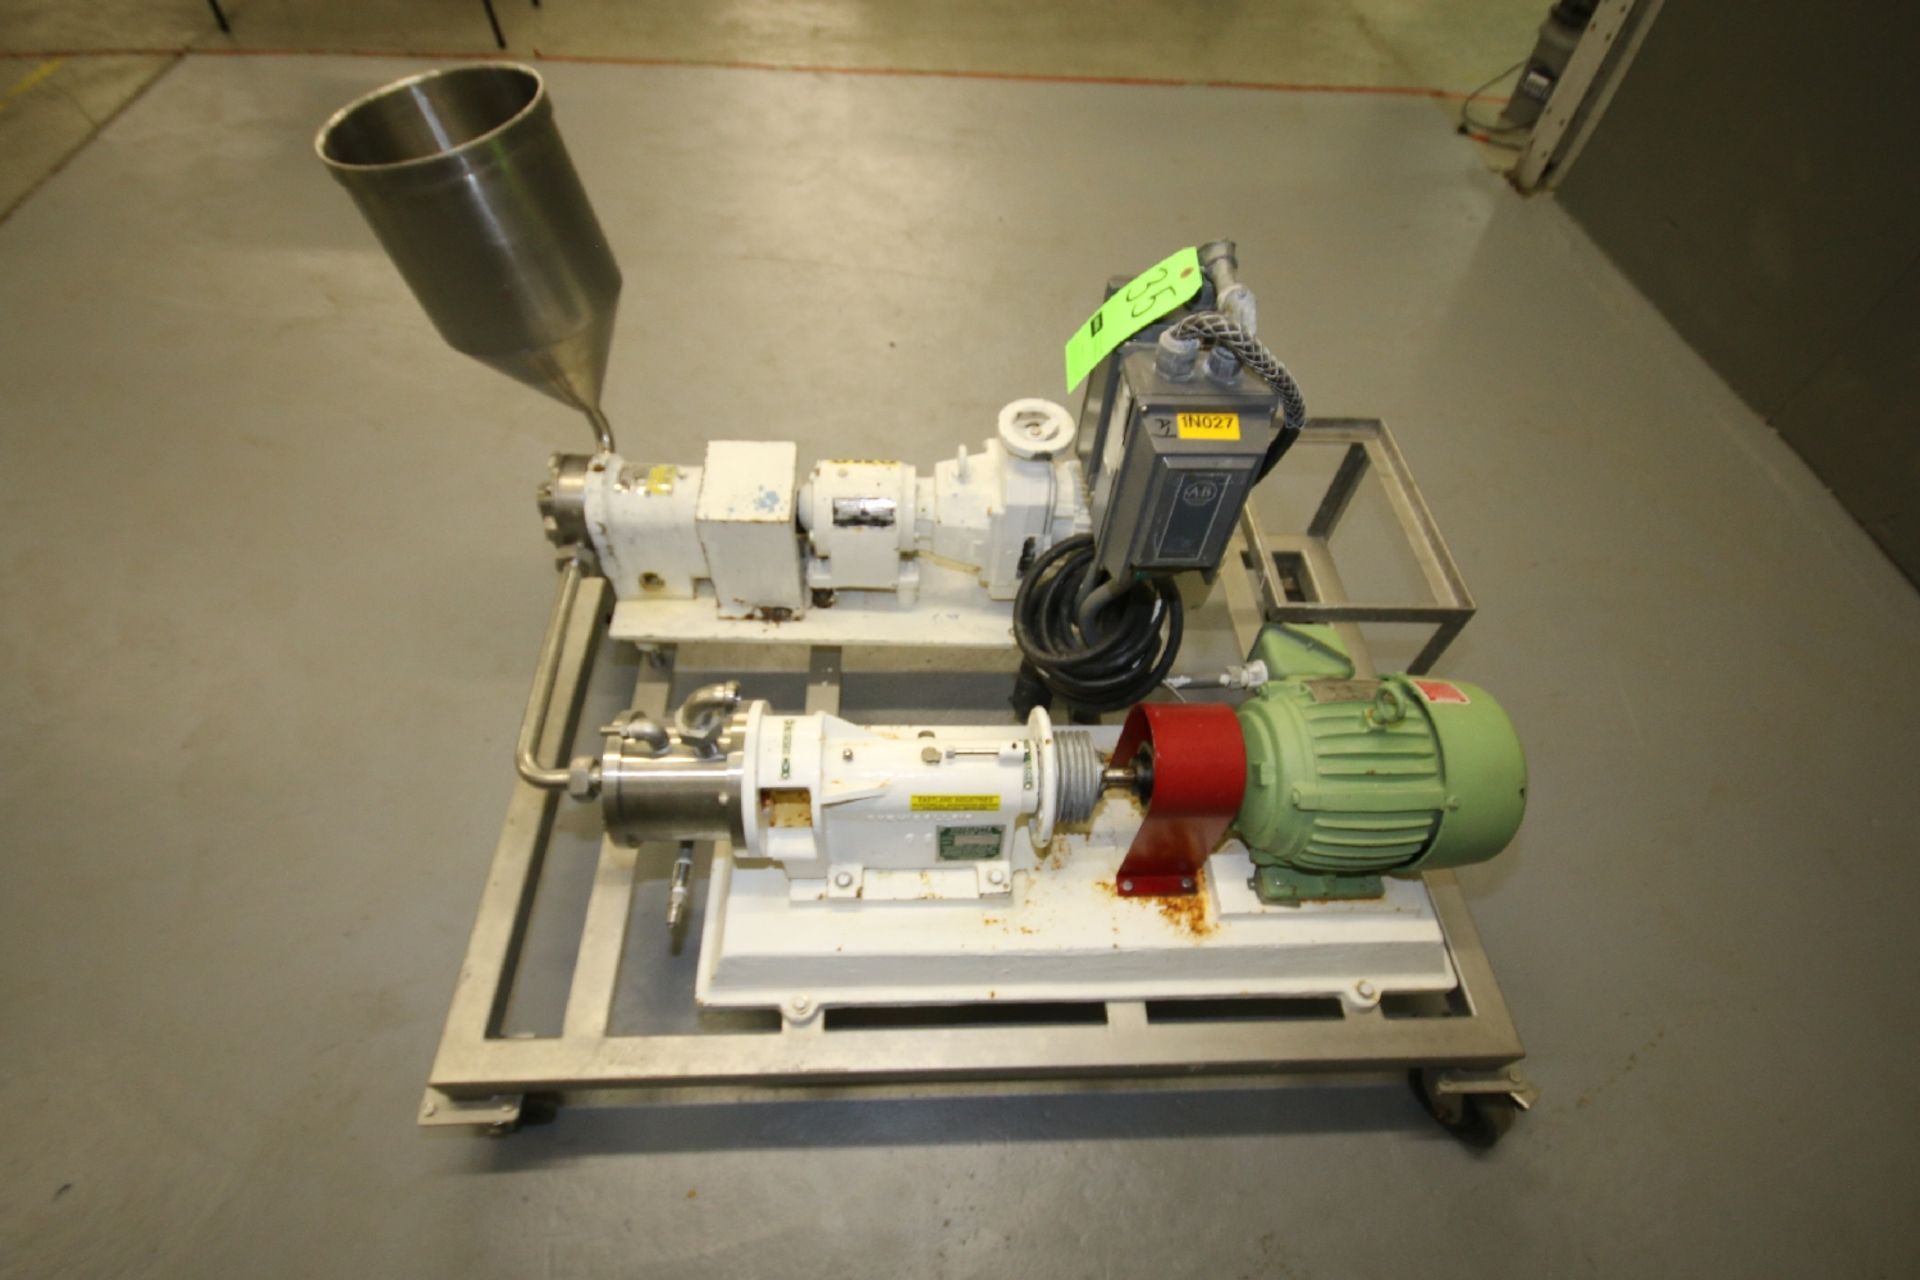 Charlotte S/S Colloid Mill, Model SD2, S/N 3348 with 3 hp Motor and Waukesha Positive Displacement - Image 4 of 7